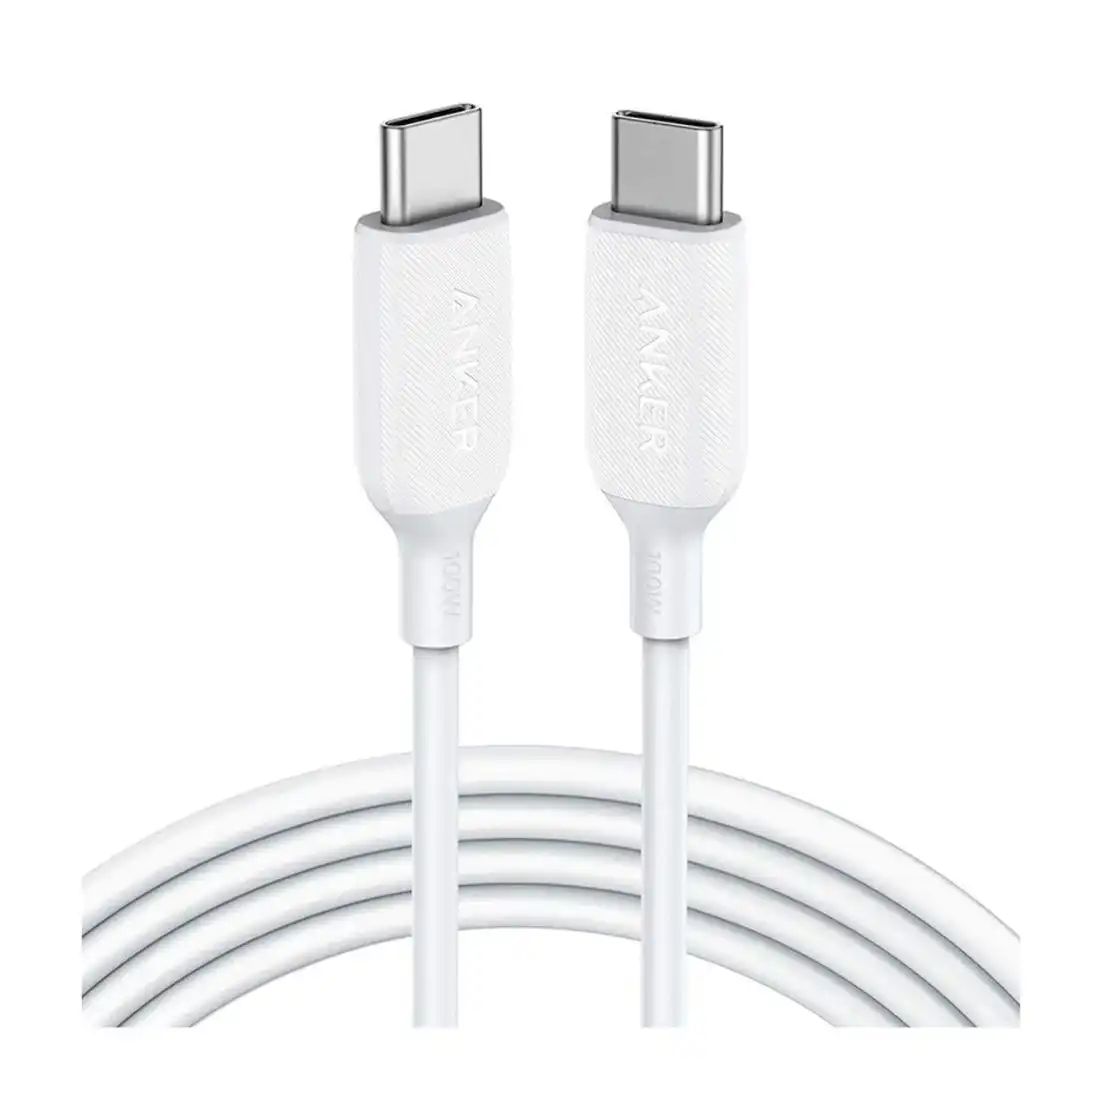 Anker PowerLine III USB-C to USB-C 100W 2.0 Cable 1.8m - White